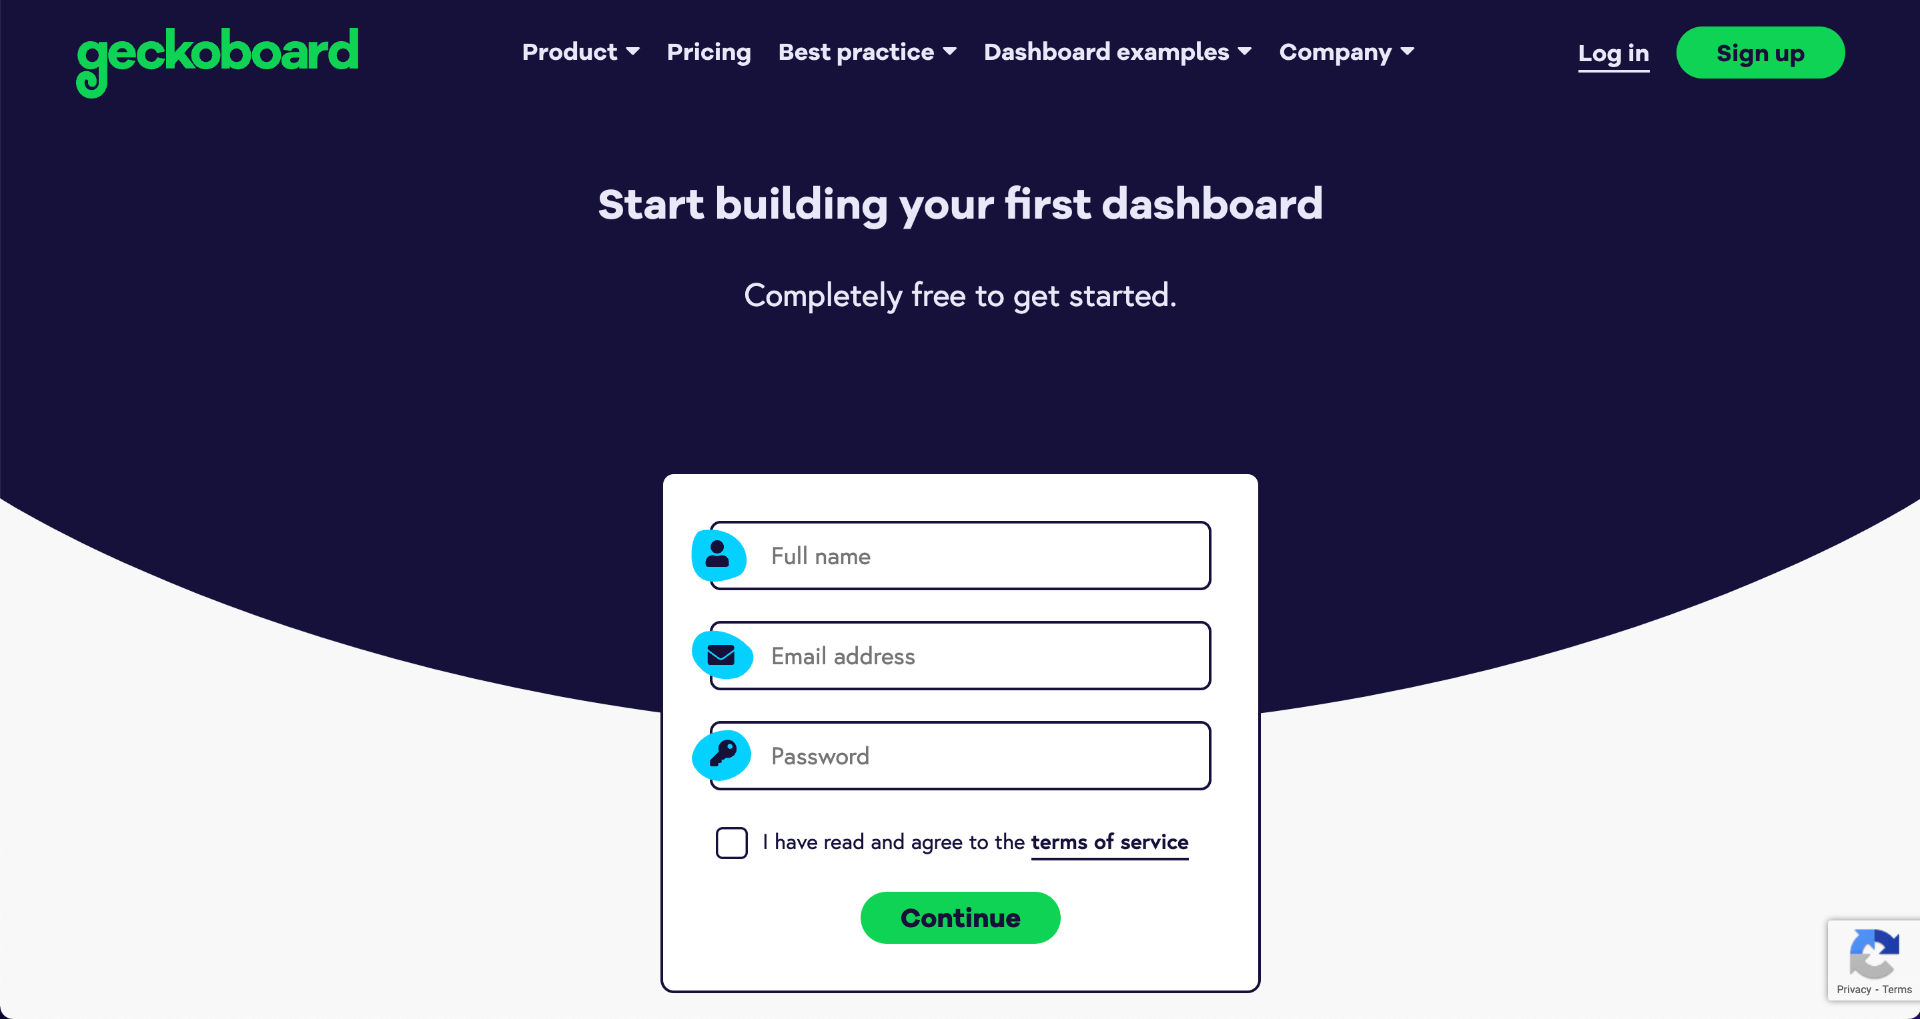 Screenshot of the Geckoboard signup page